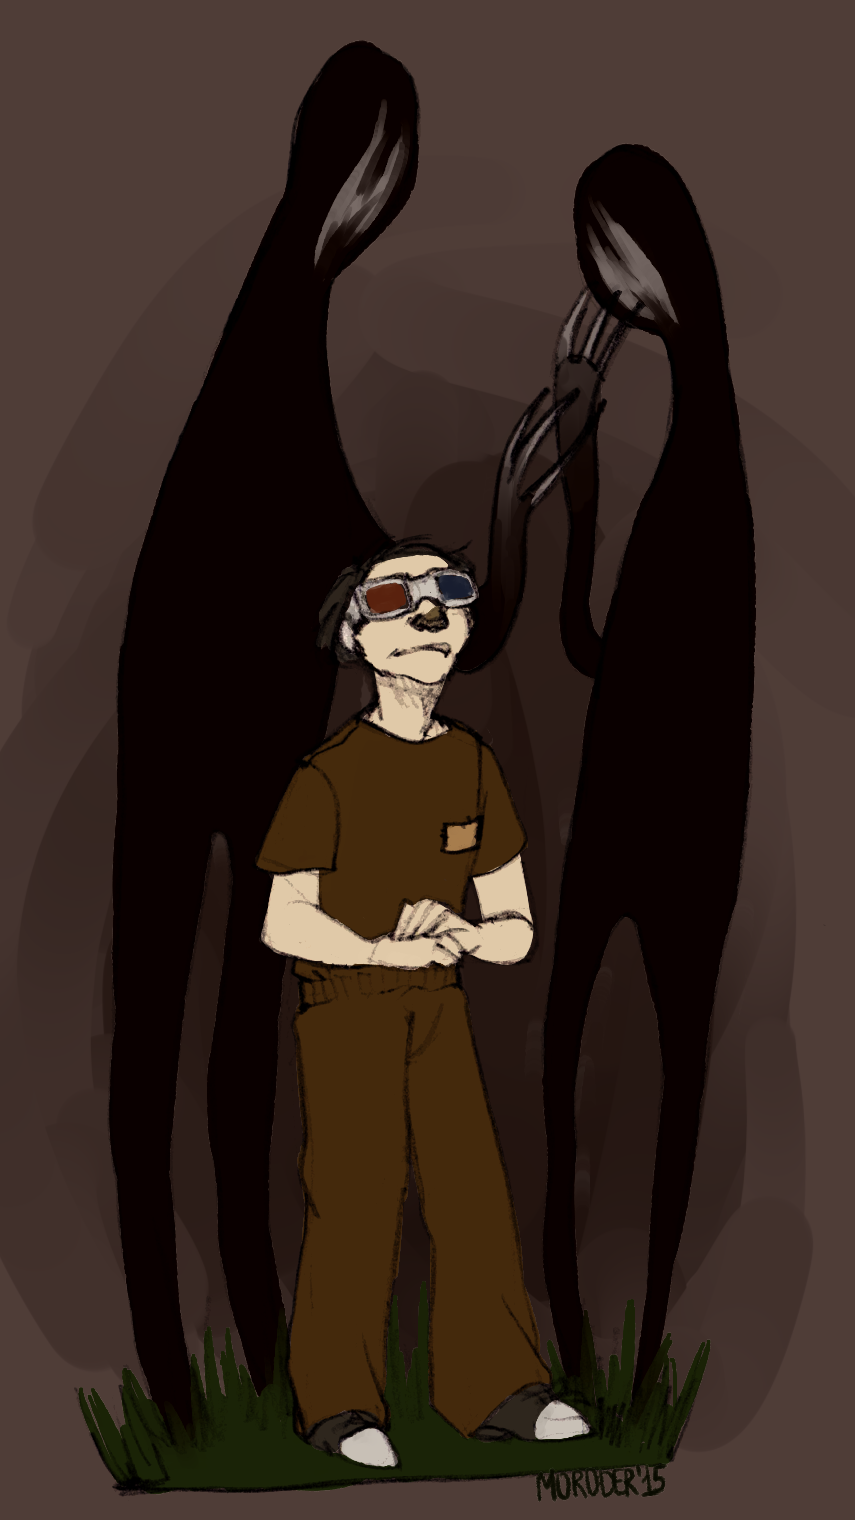 More Galleries of Scp Fan Art.